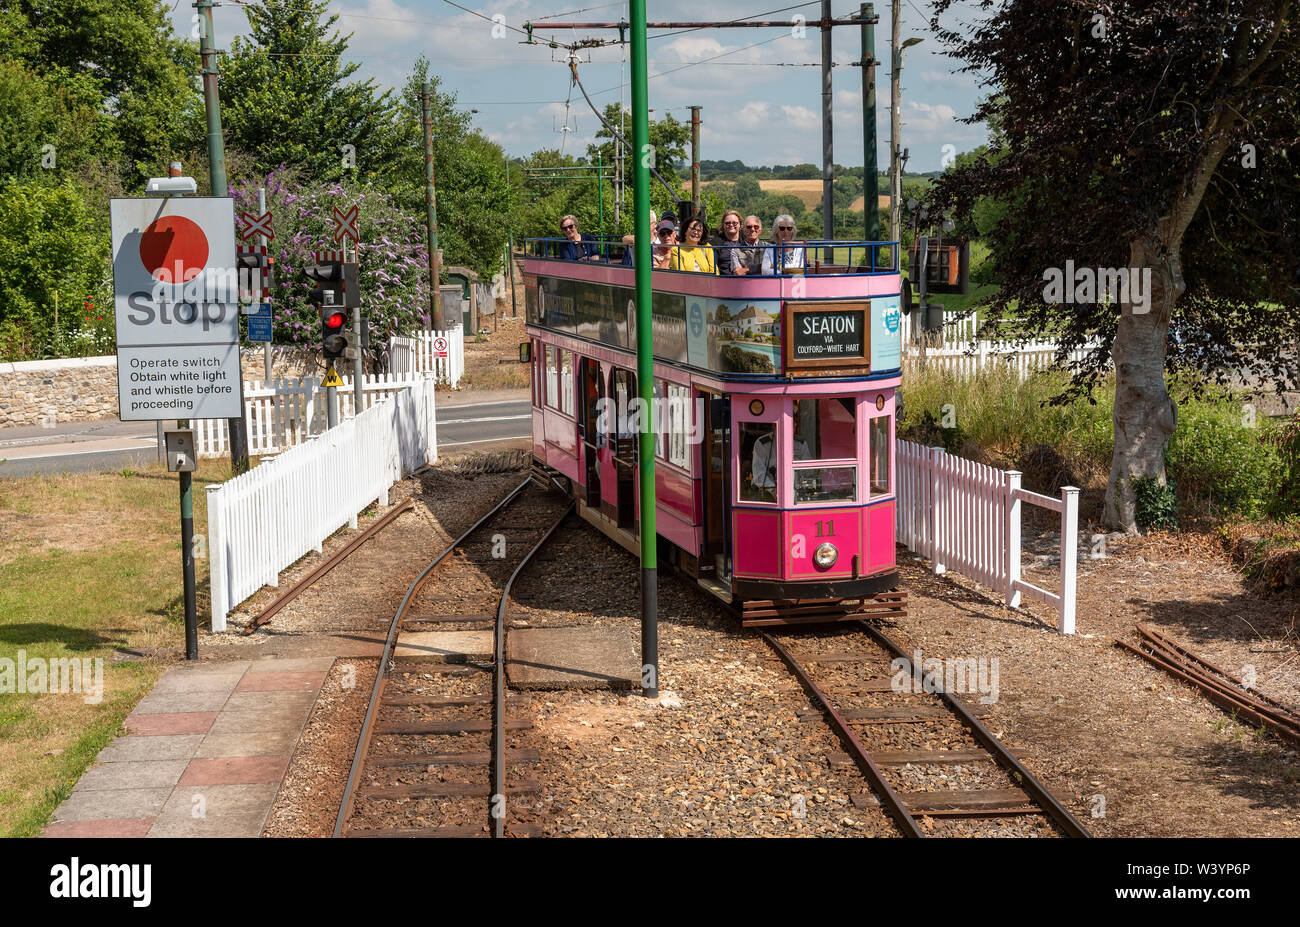 Seaton, Devon, England, UK. July 2019. Seaton Tramway. Electric tram.  Tramcar and passengers passing a level crossing Stock Photo